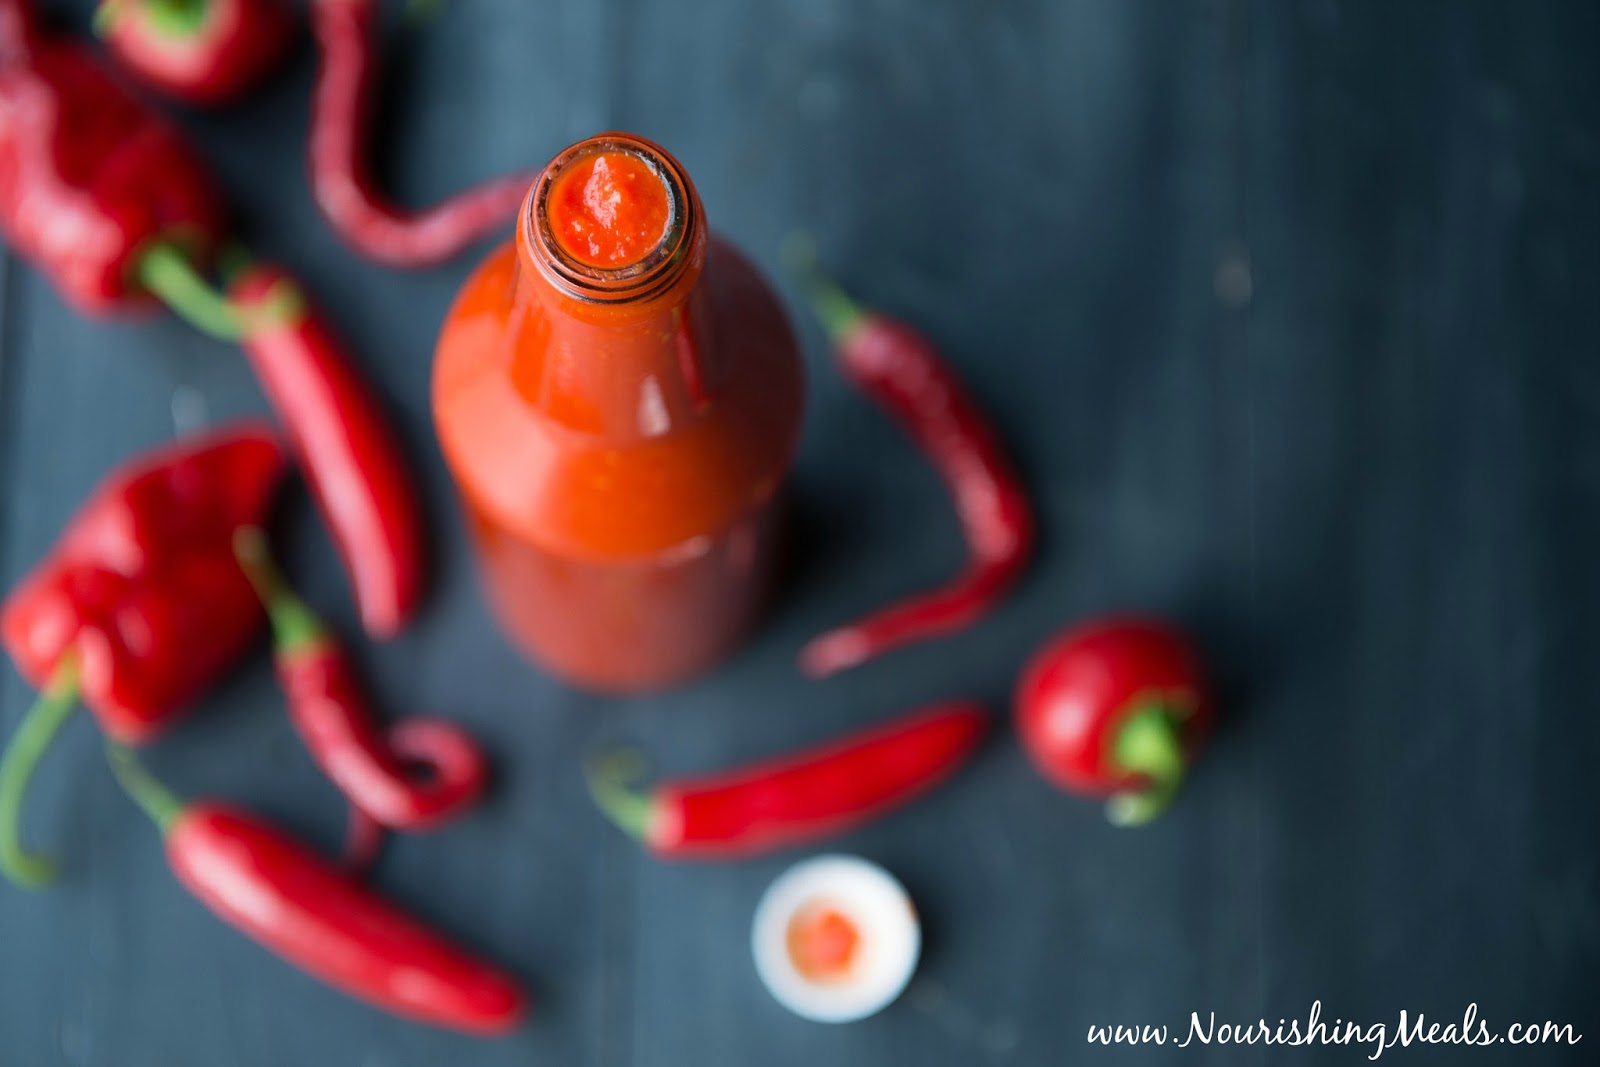 What is a good recipe for homemade hot pepper sauce?